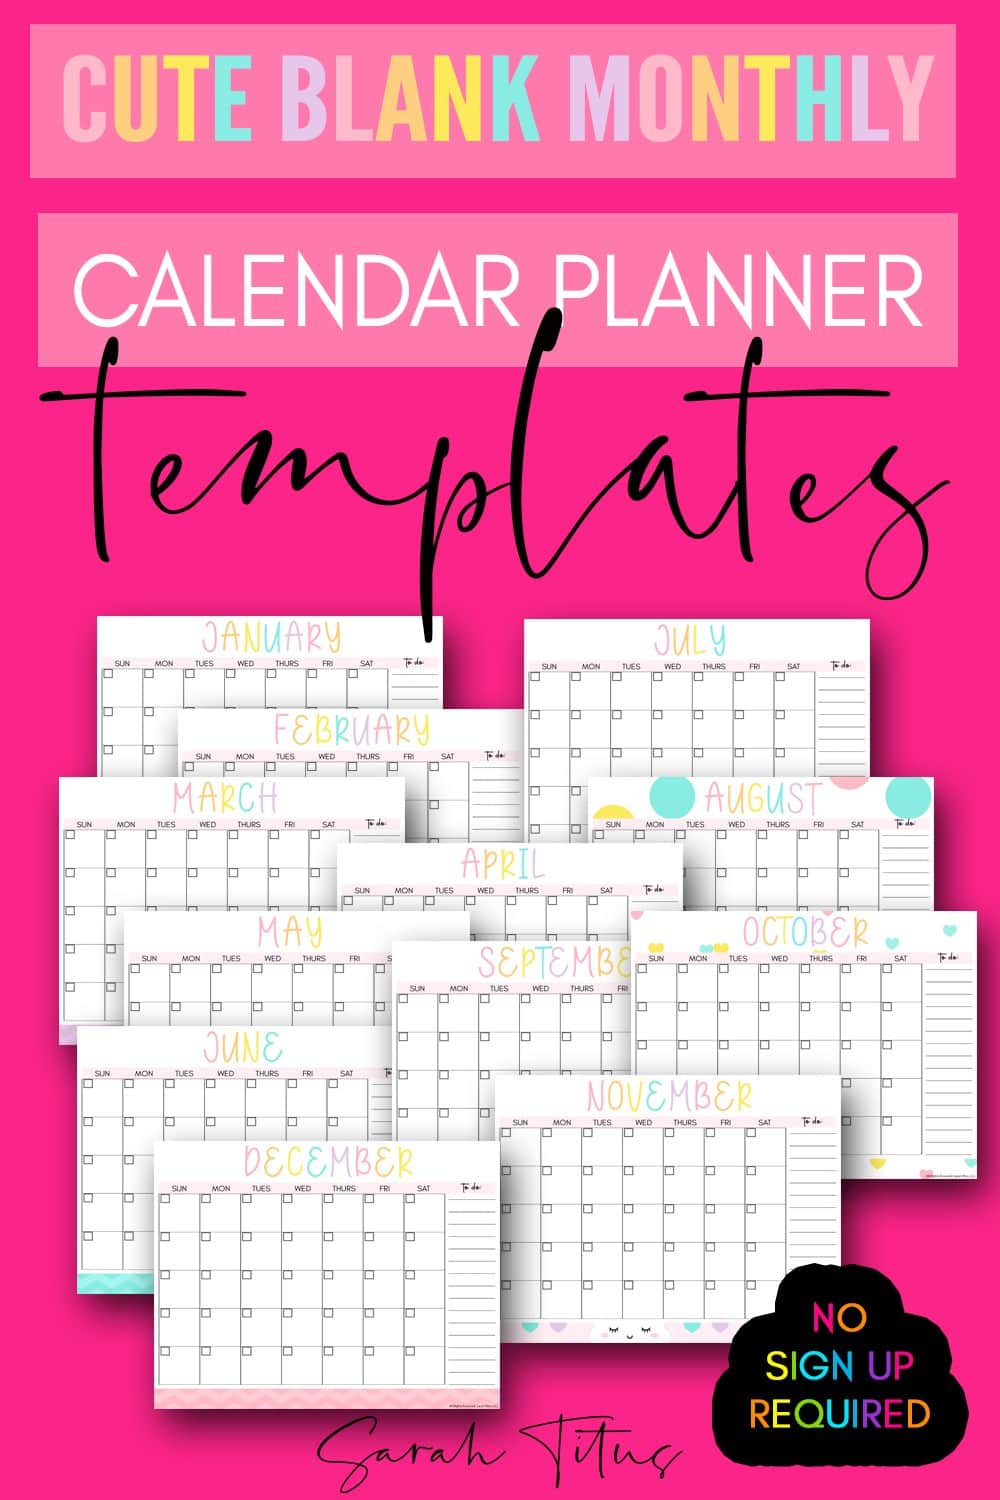 free-blank-monthly-calendar-printables-find-a-free-printable-editable